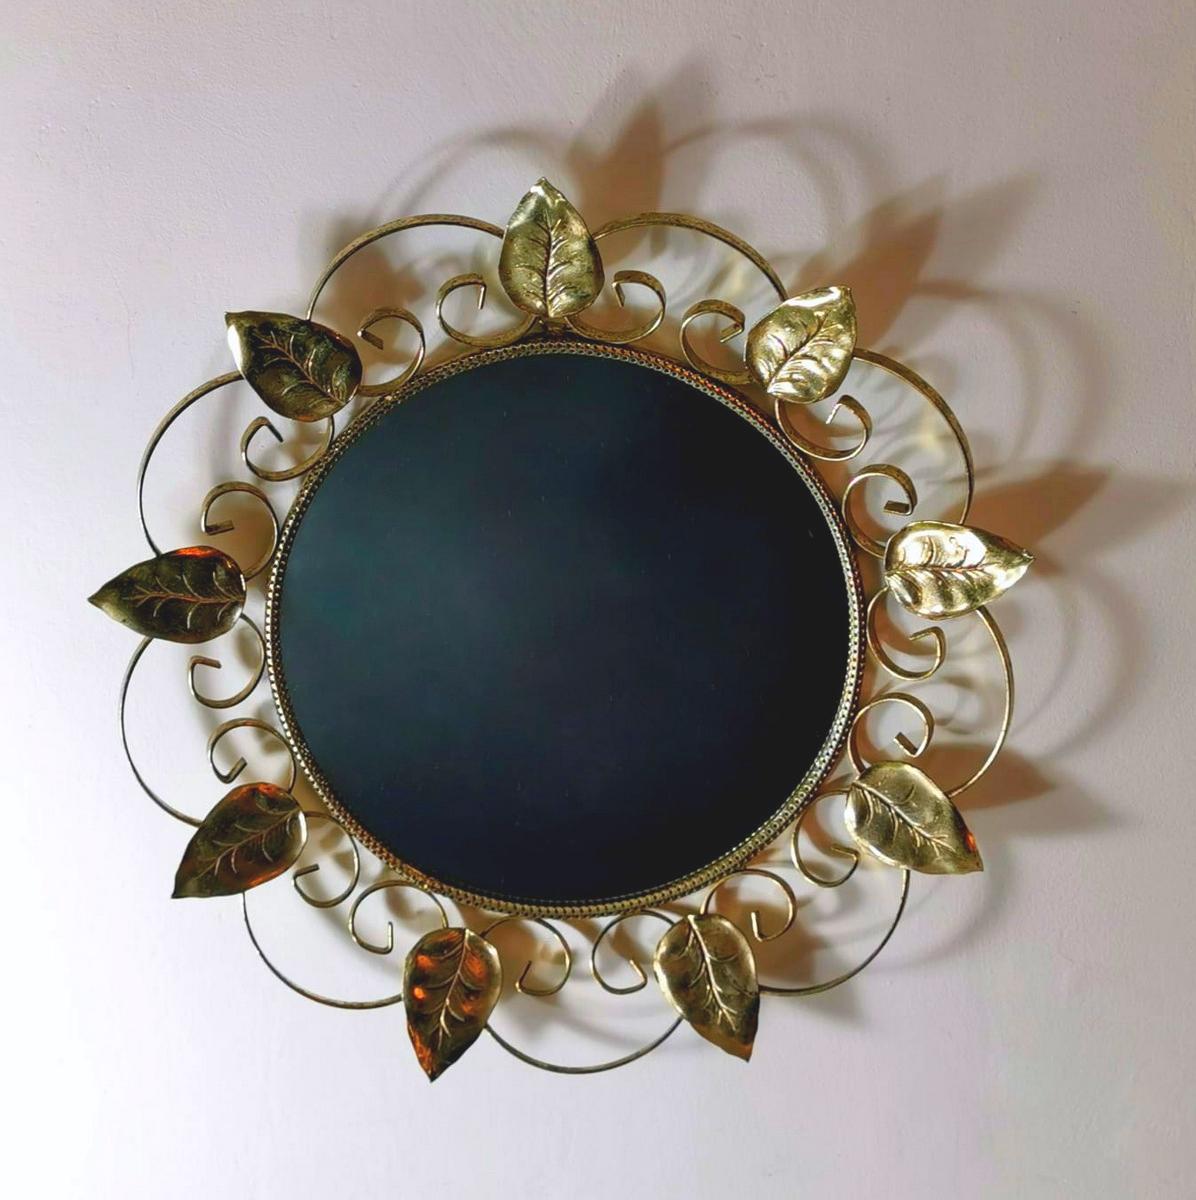 We kindly suggest you read the whole description, because with it we try to give you detailed technical and historical information to guarantee the authenticity of our objects.
Mirror in gilded metal, the mulberry leaves are softly arranged on a